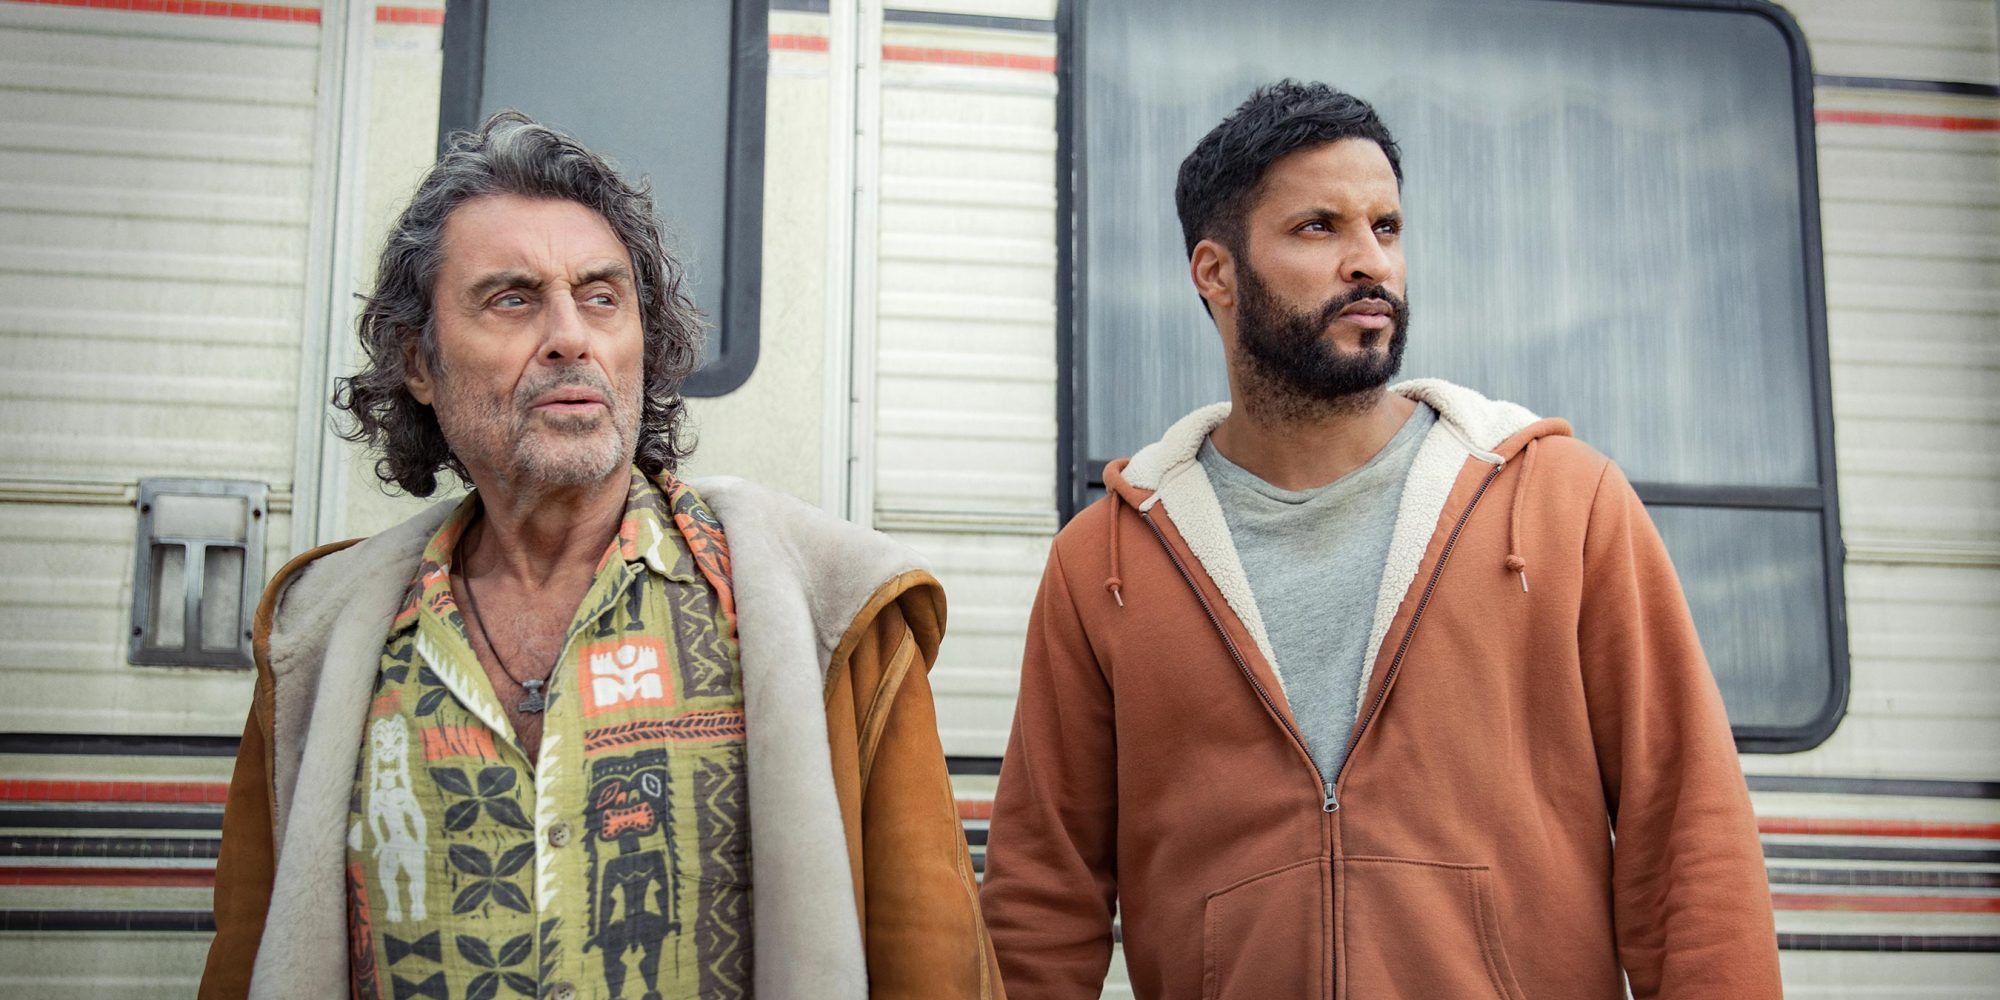 Ian McShane and Ricky Whittle outisde a trailer in American Gods Season 3